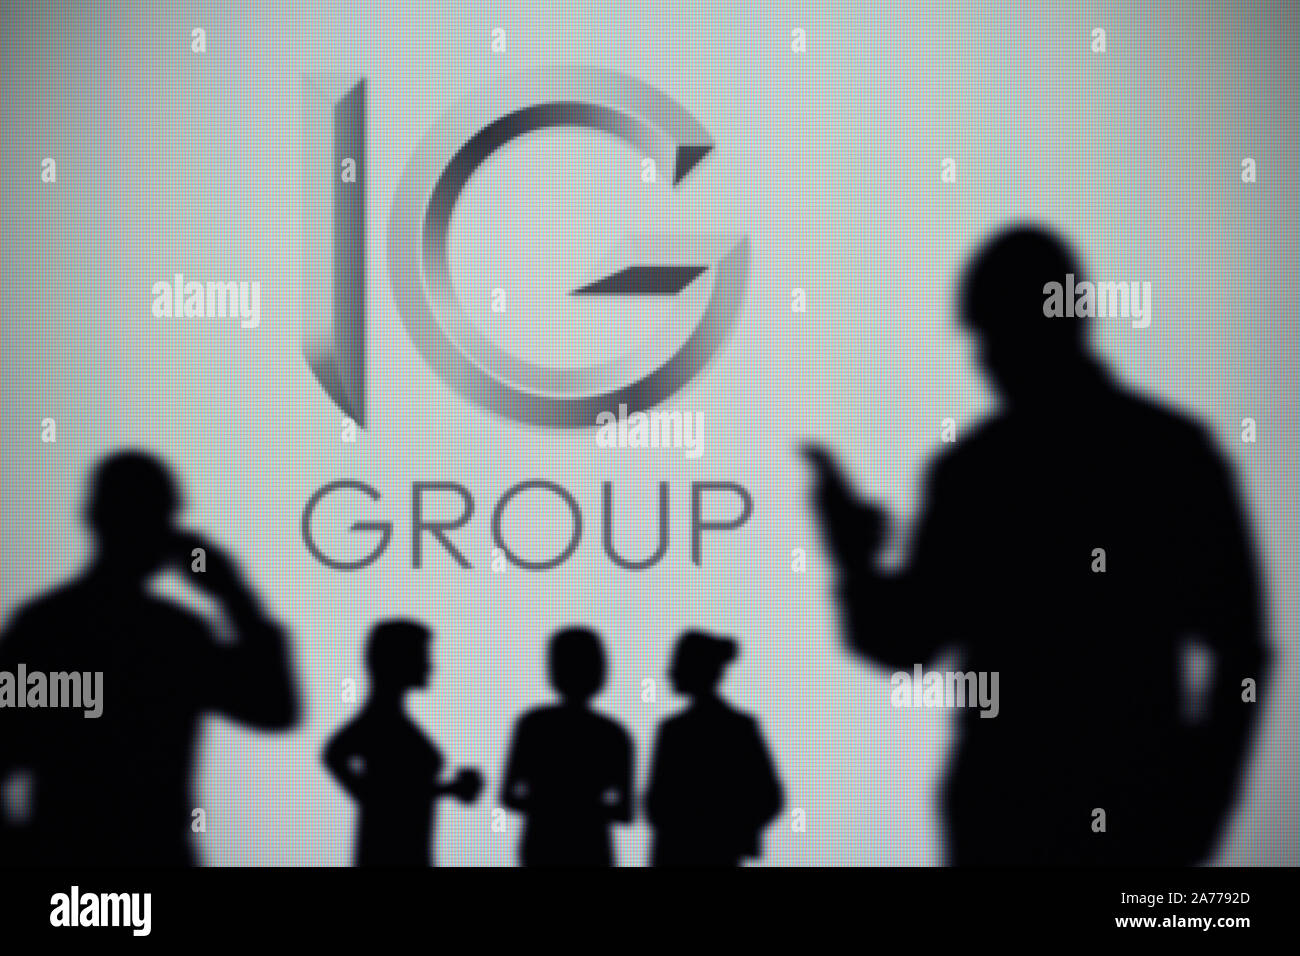 The IG Group logo is seen on an LED screen in the background while a silhouetted person uses a smartphone (Editorial use only) Stock Photo